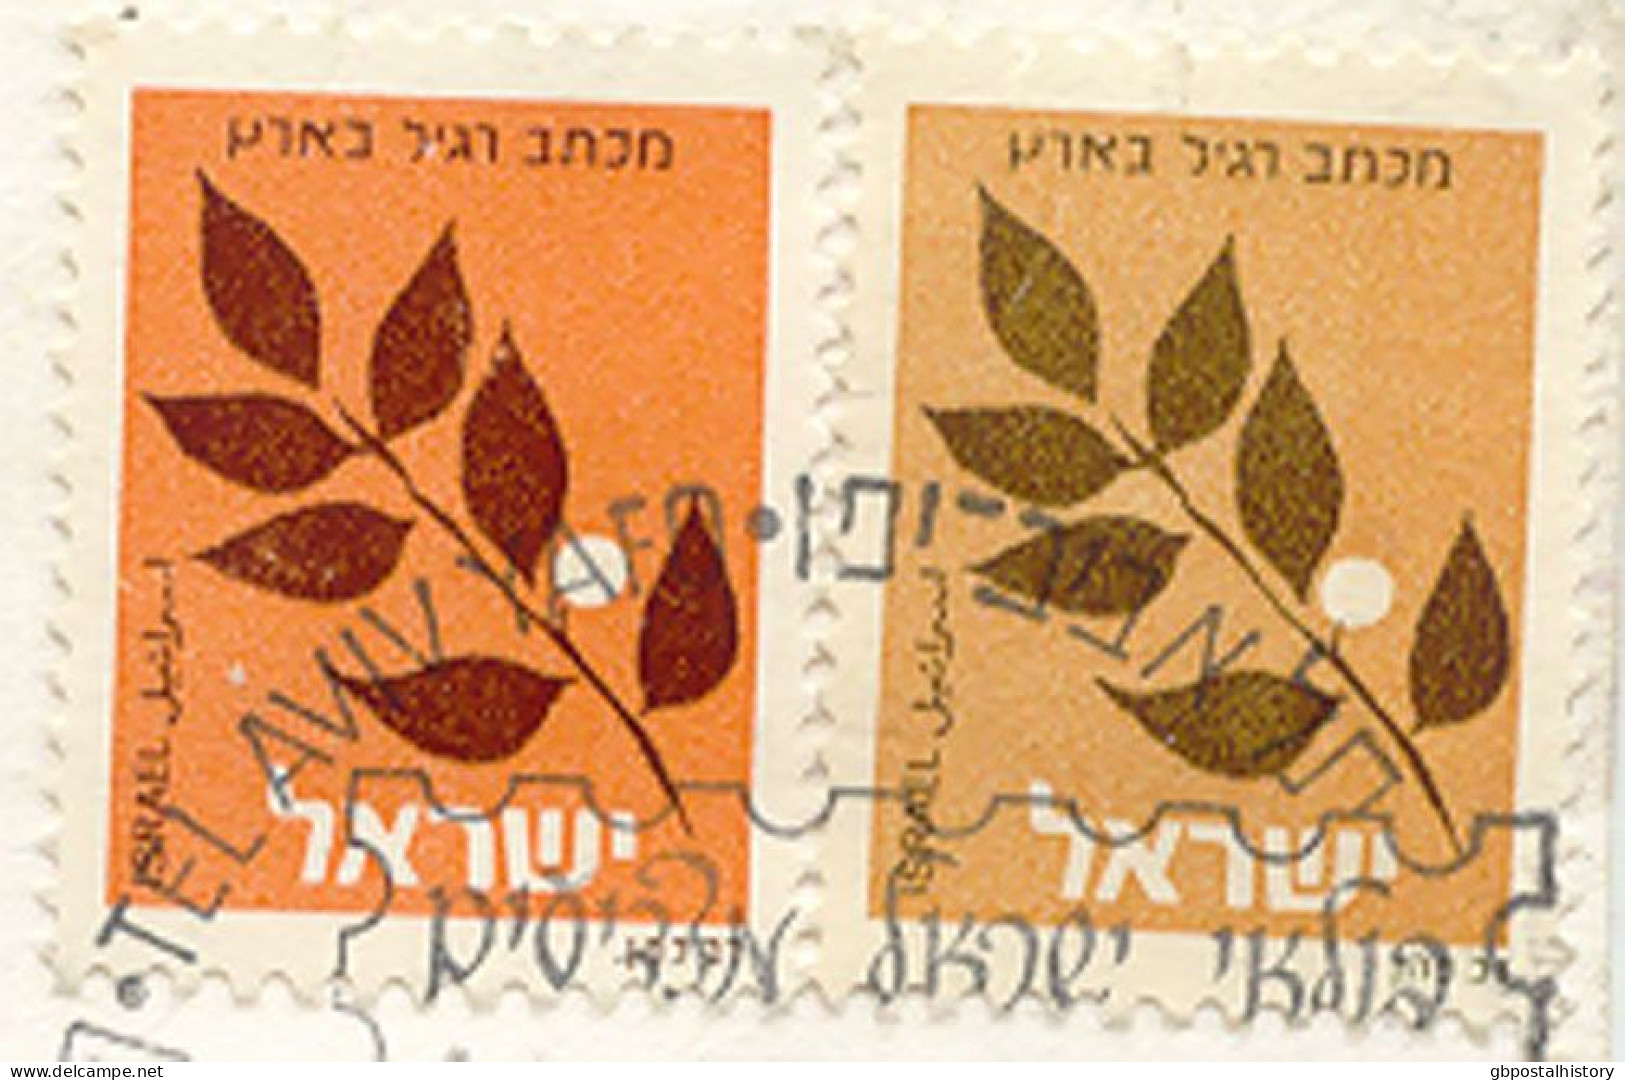 ISRAEL 1986 Branch Without Valuation 2 Times On Very Fine Cover With SST "AMERIPEX '86 22.5.1986", MAJOR ERROR & VARIETY - Briefe U. Dokumente